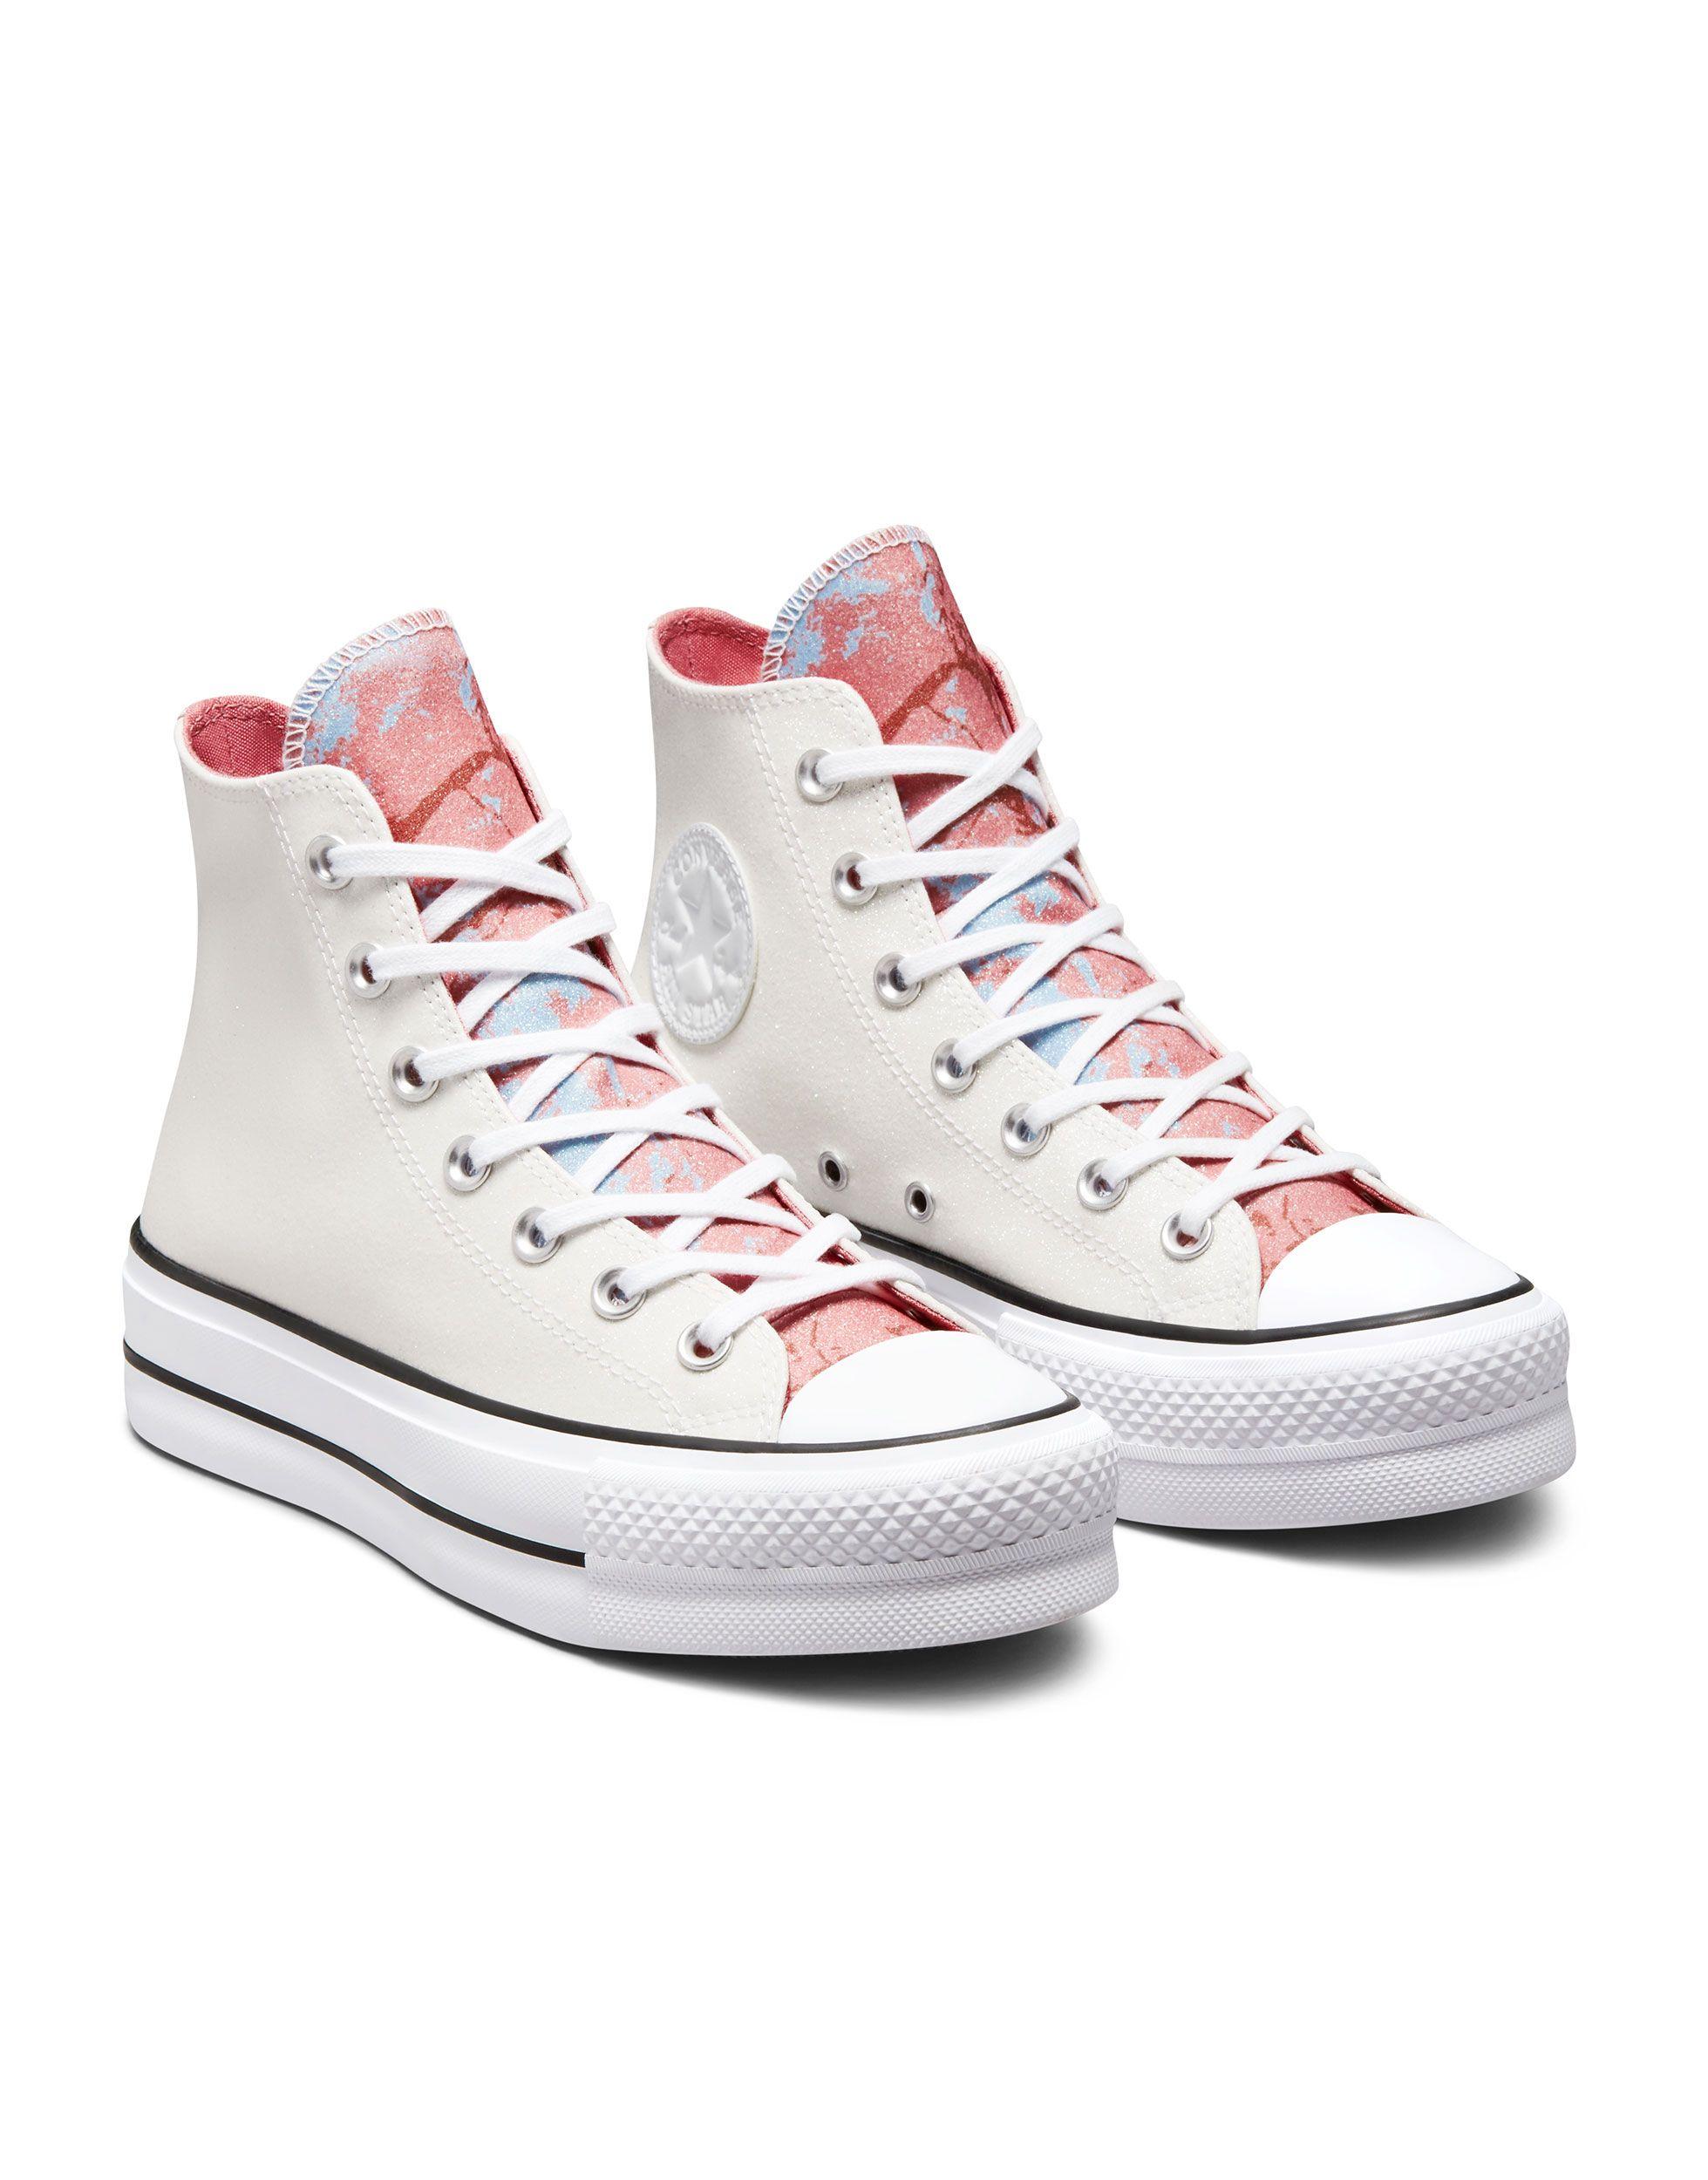 Converse Chuck Taylor All Star Ox Lift Hybrid Shine Glitter Sneakers in White | Lyst